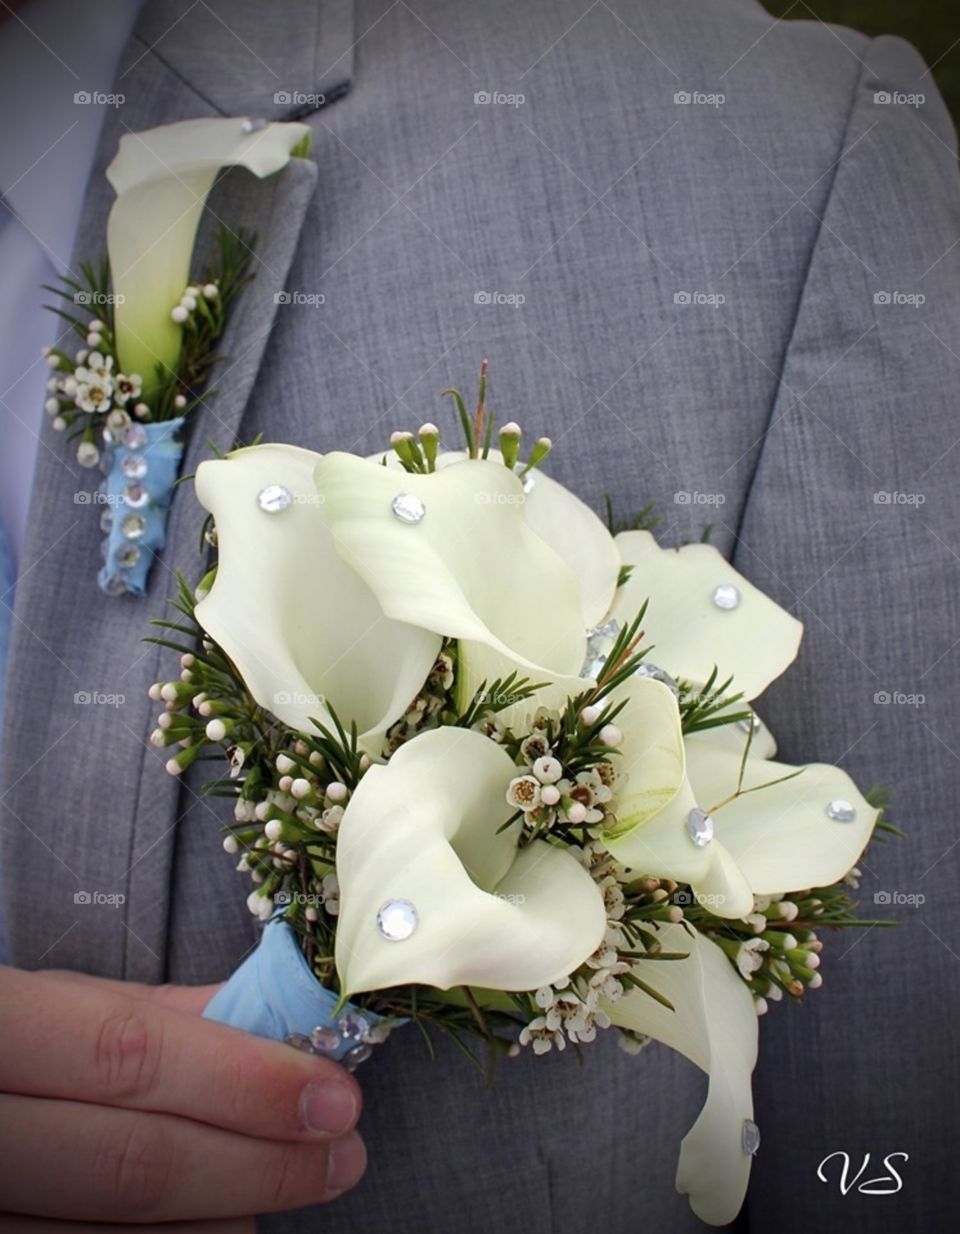 Beautiful fresh peace lily bouquet and boutonniere